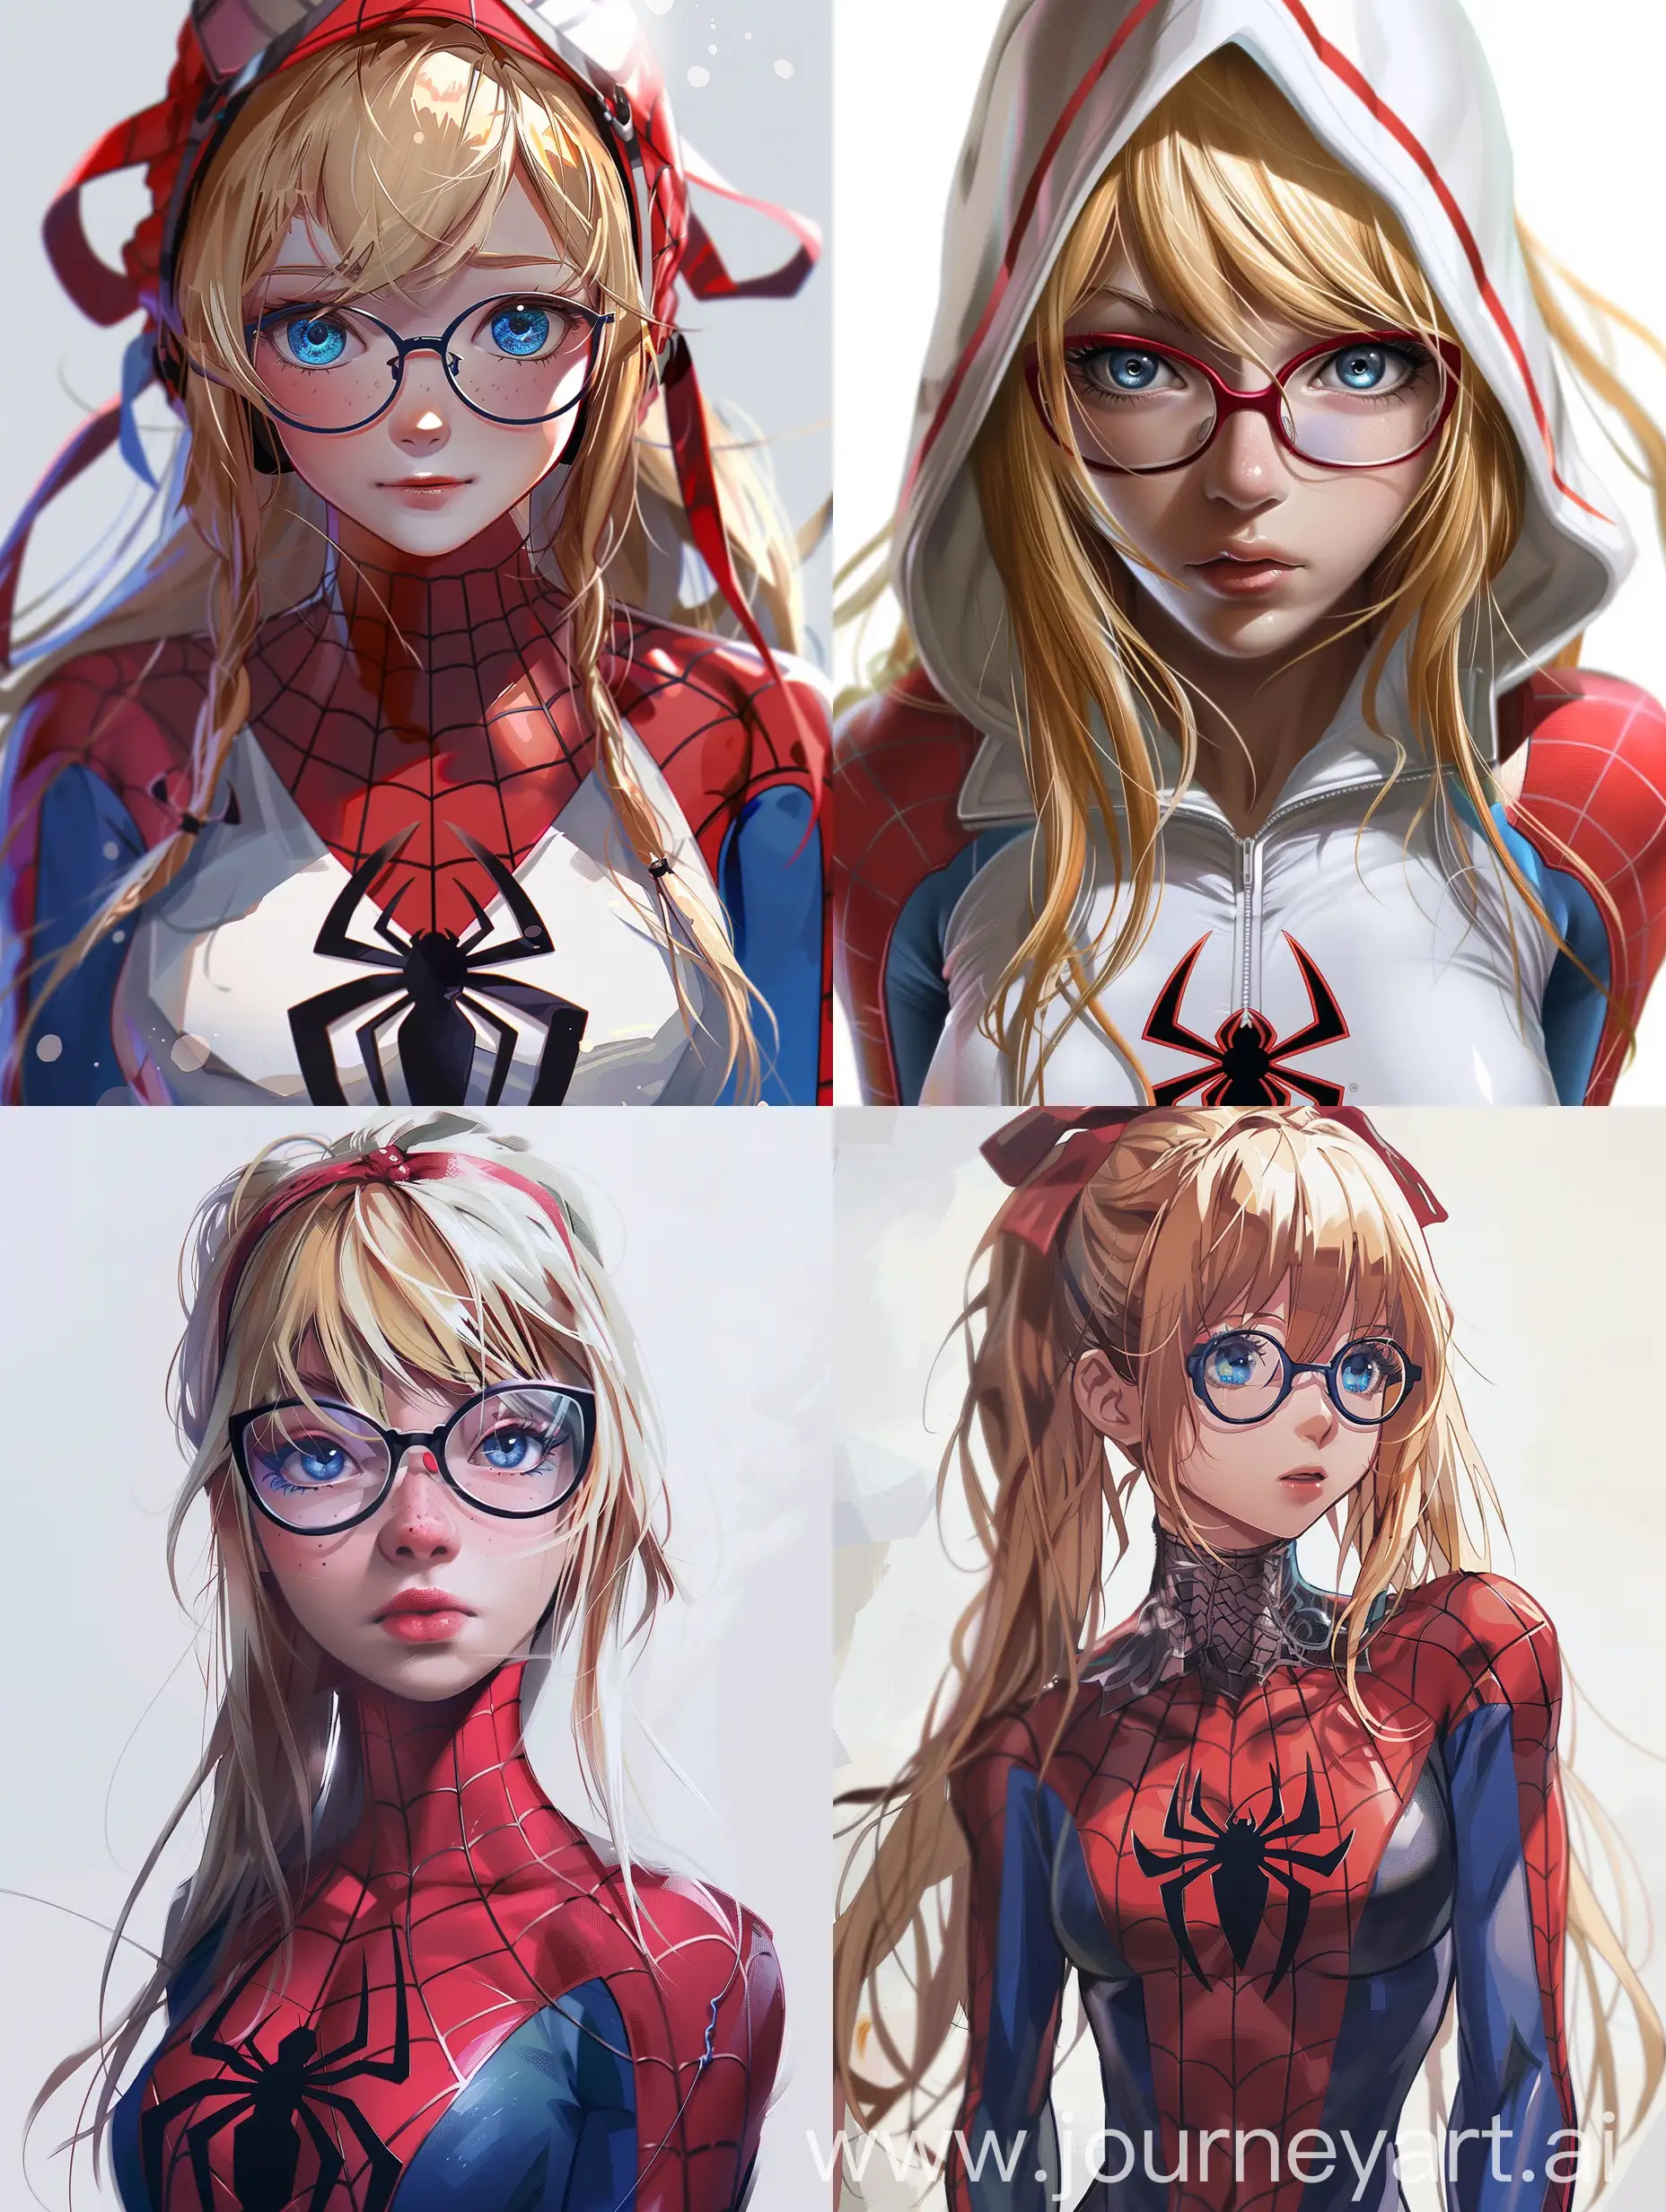 young, hot, beautiful, anime girl, blue eyes, blonde hair,wearing glasses, spider-gwen suit